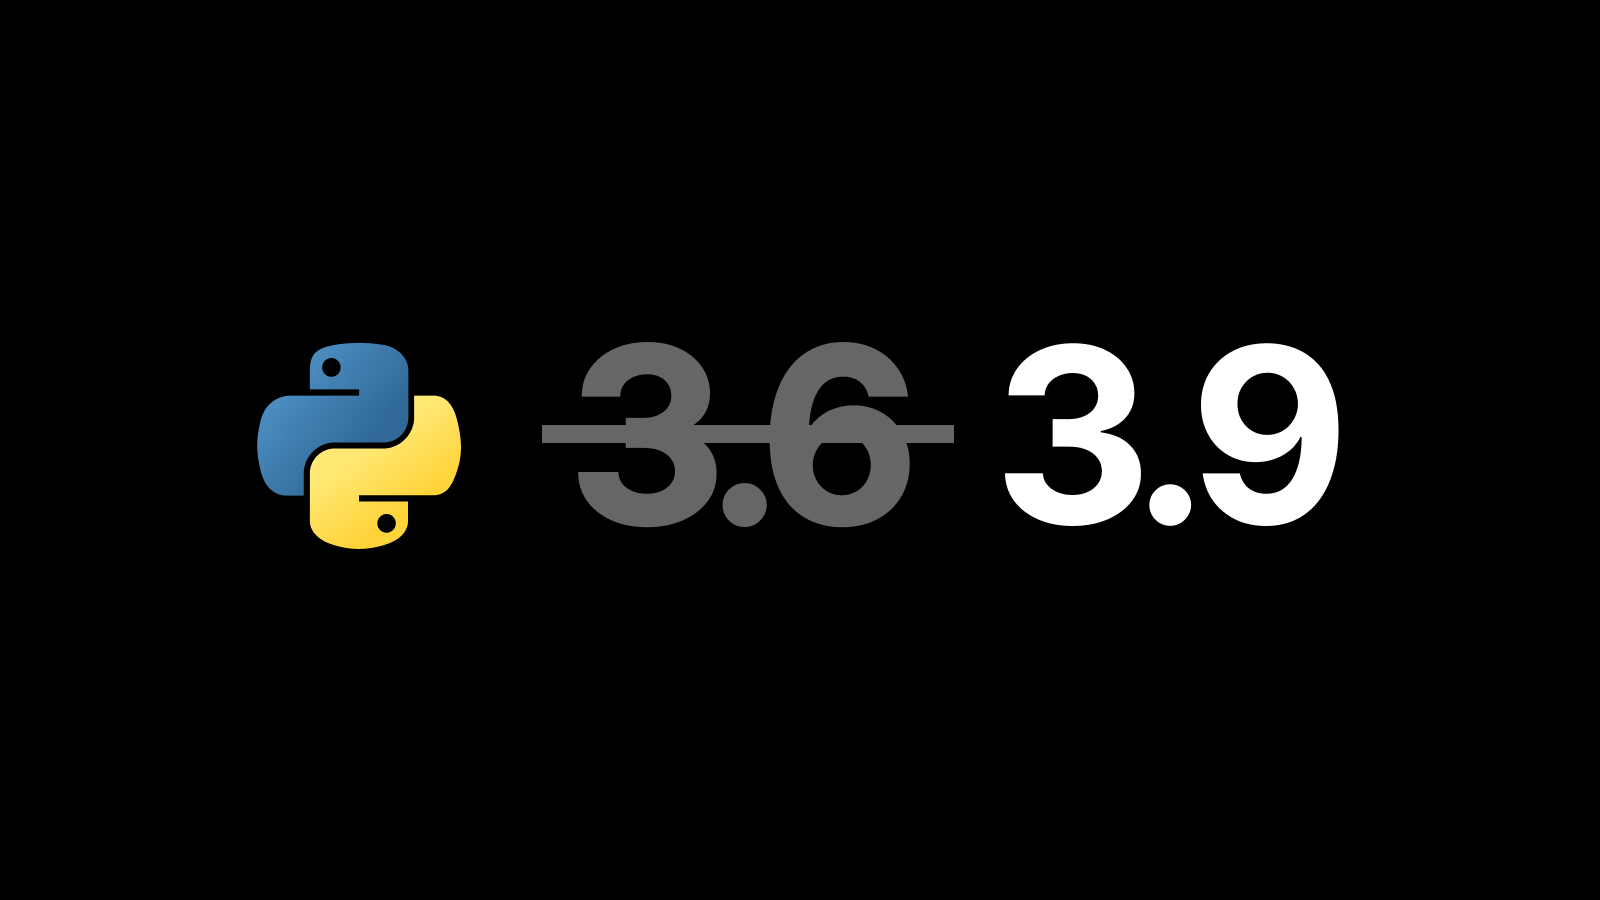 Cover for Python 3.6 is being deprecated